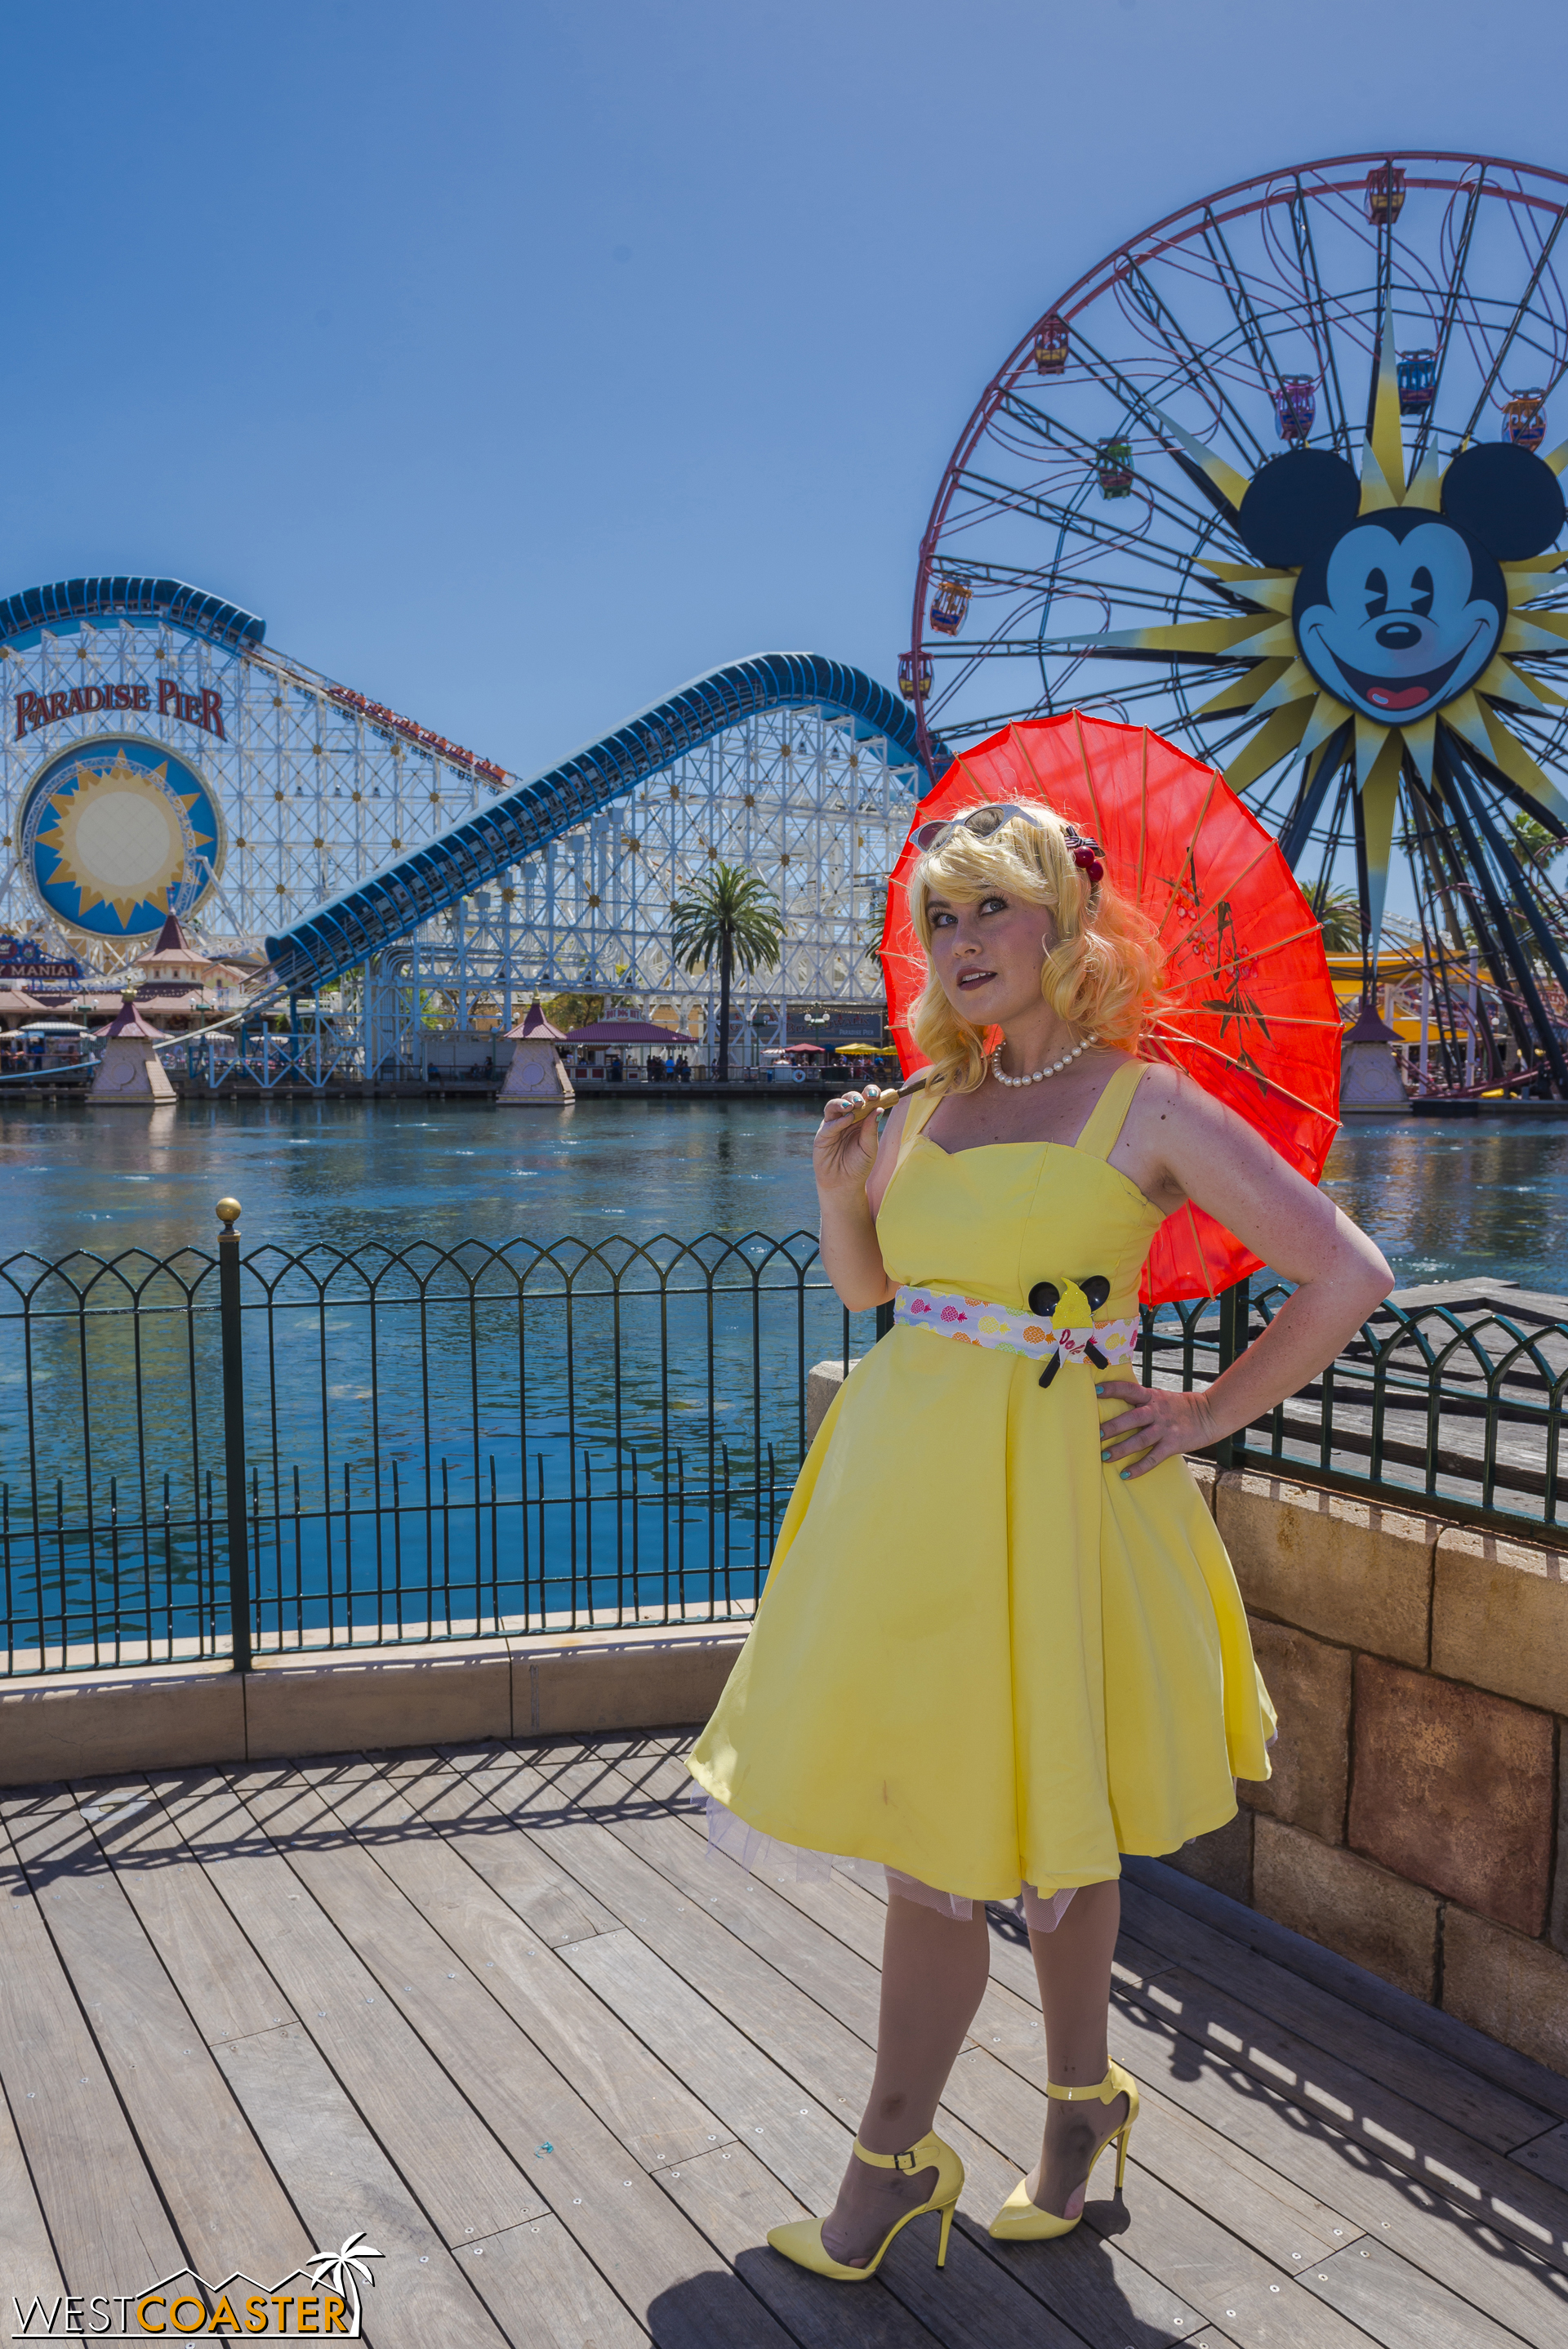  Other Disneybound ideas? How about food?&nbsp; Like Dole Whip? 